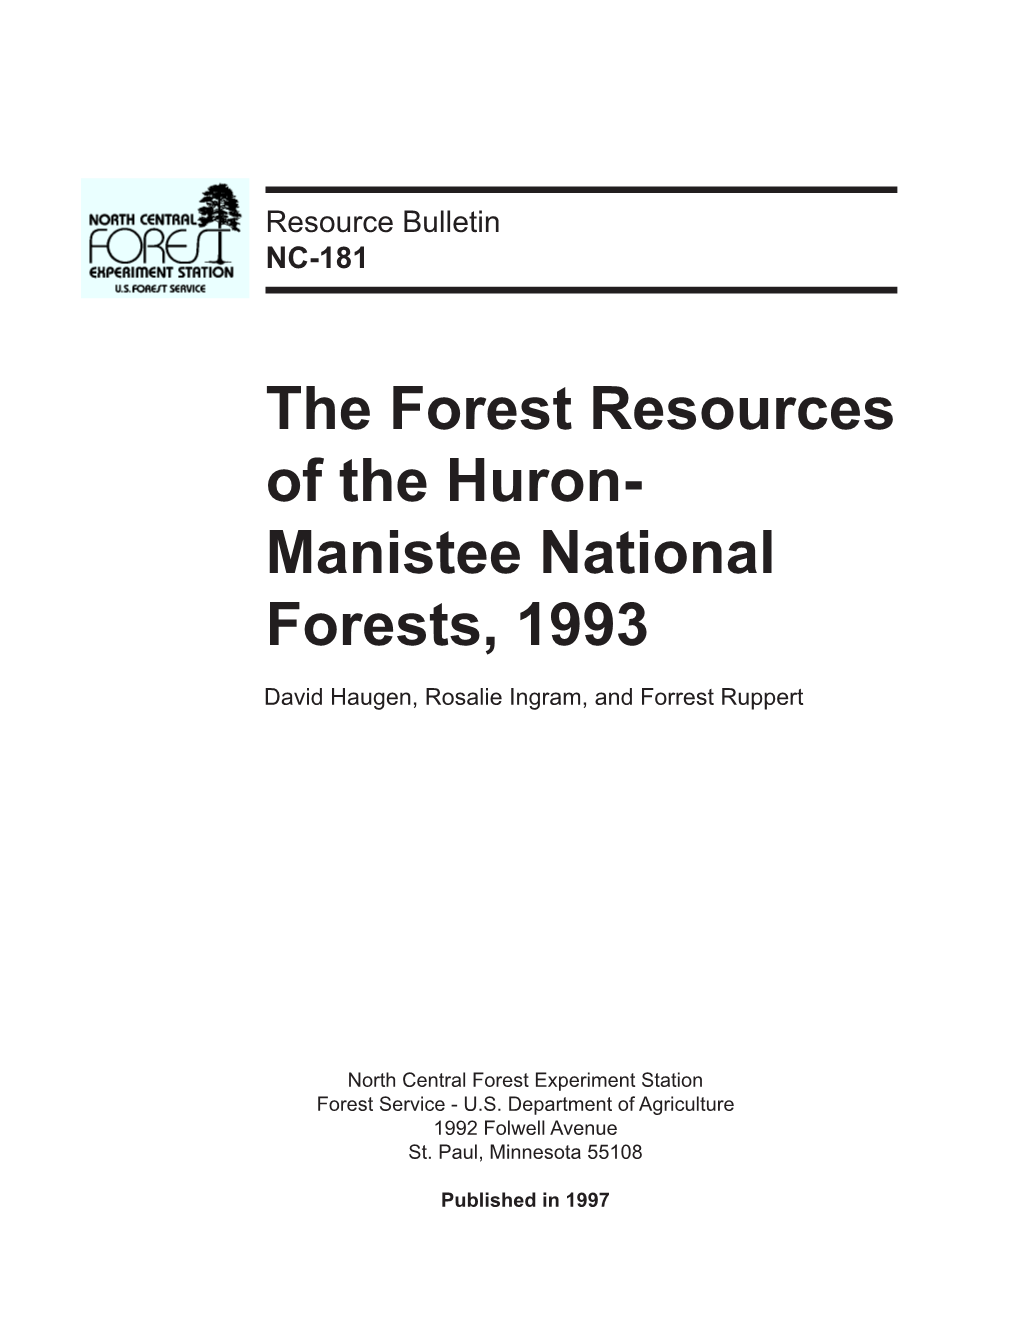 The Forest Resources of the Huron- Manistee National Forests, 1993